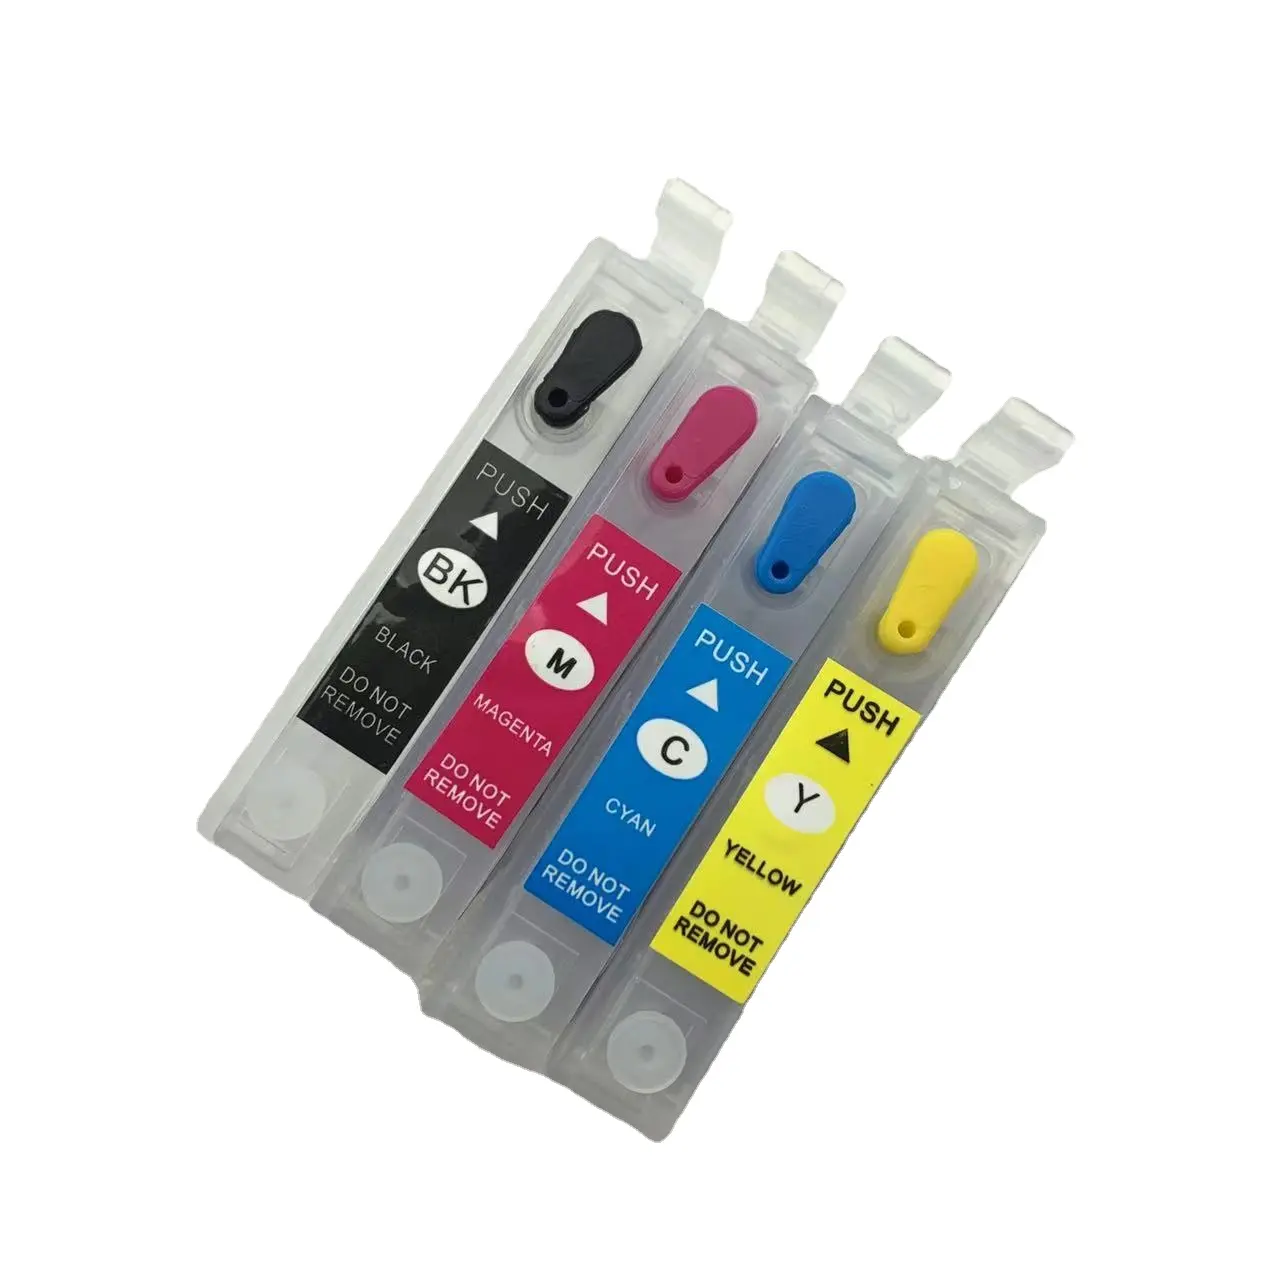 T0891 T0892 T0893 T0894 Refillable Ink Cartridge for Epson Stylus S20 S21 SX100 SX105 SX115 SX110 SX210 SX215 SX218 SX415